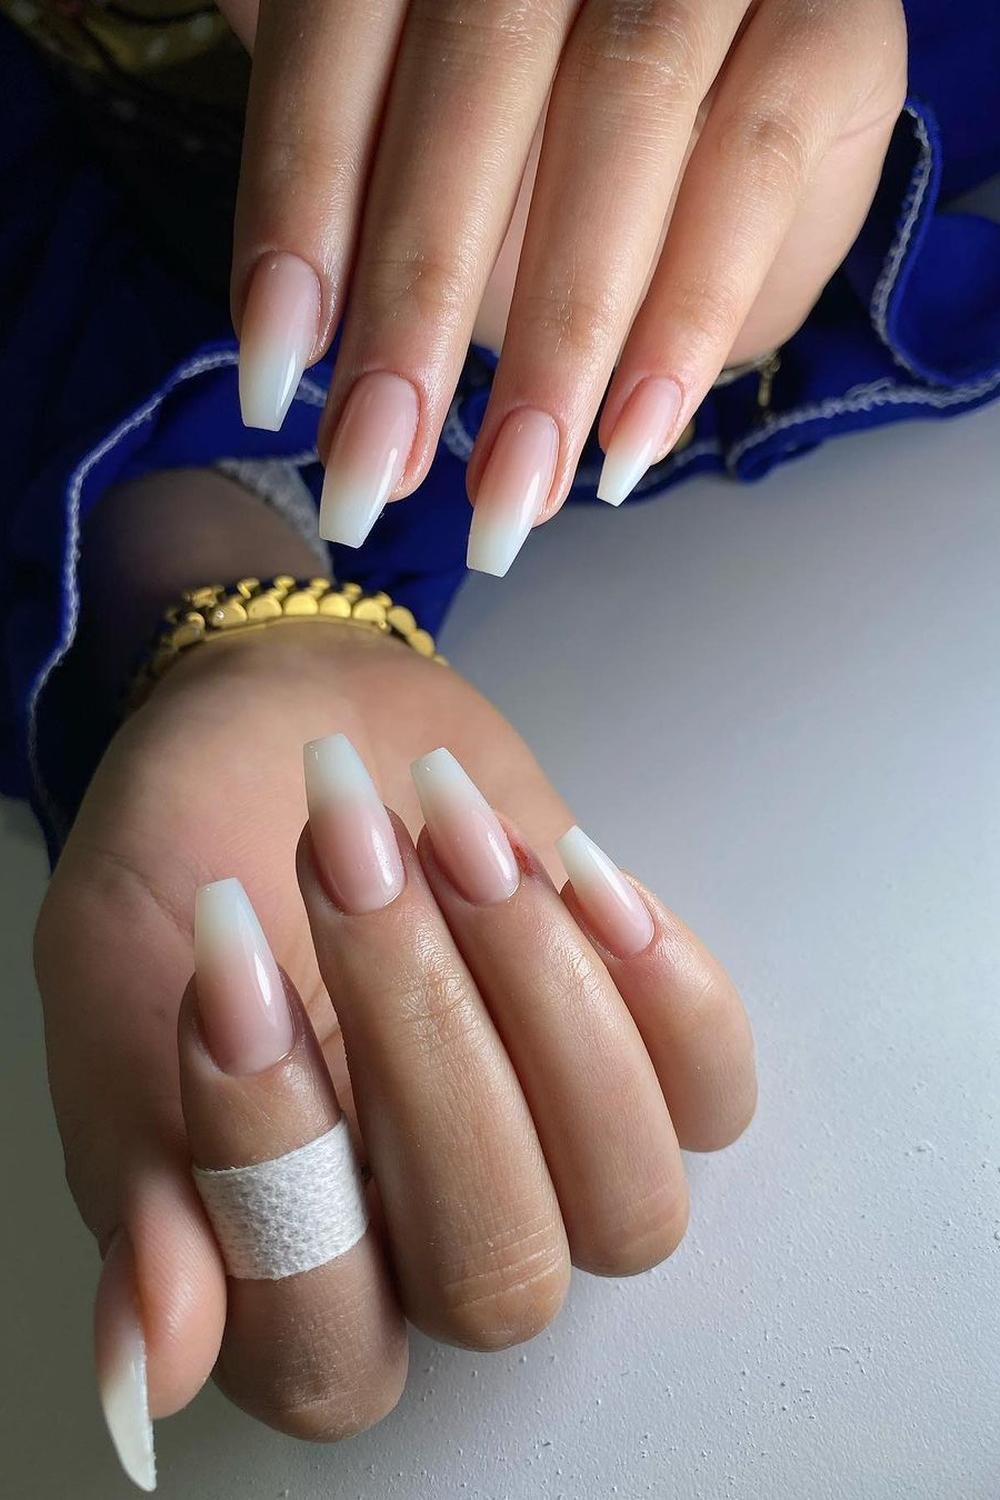 10 - Picture of Ballerina Nails